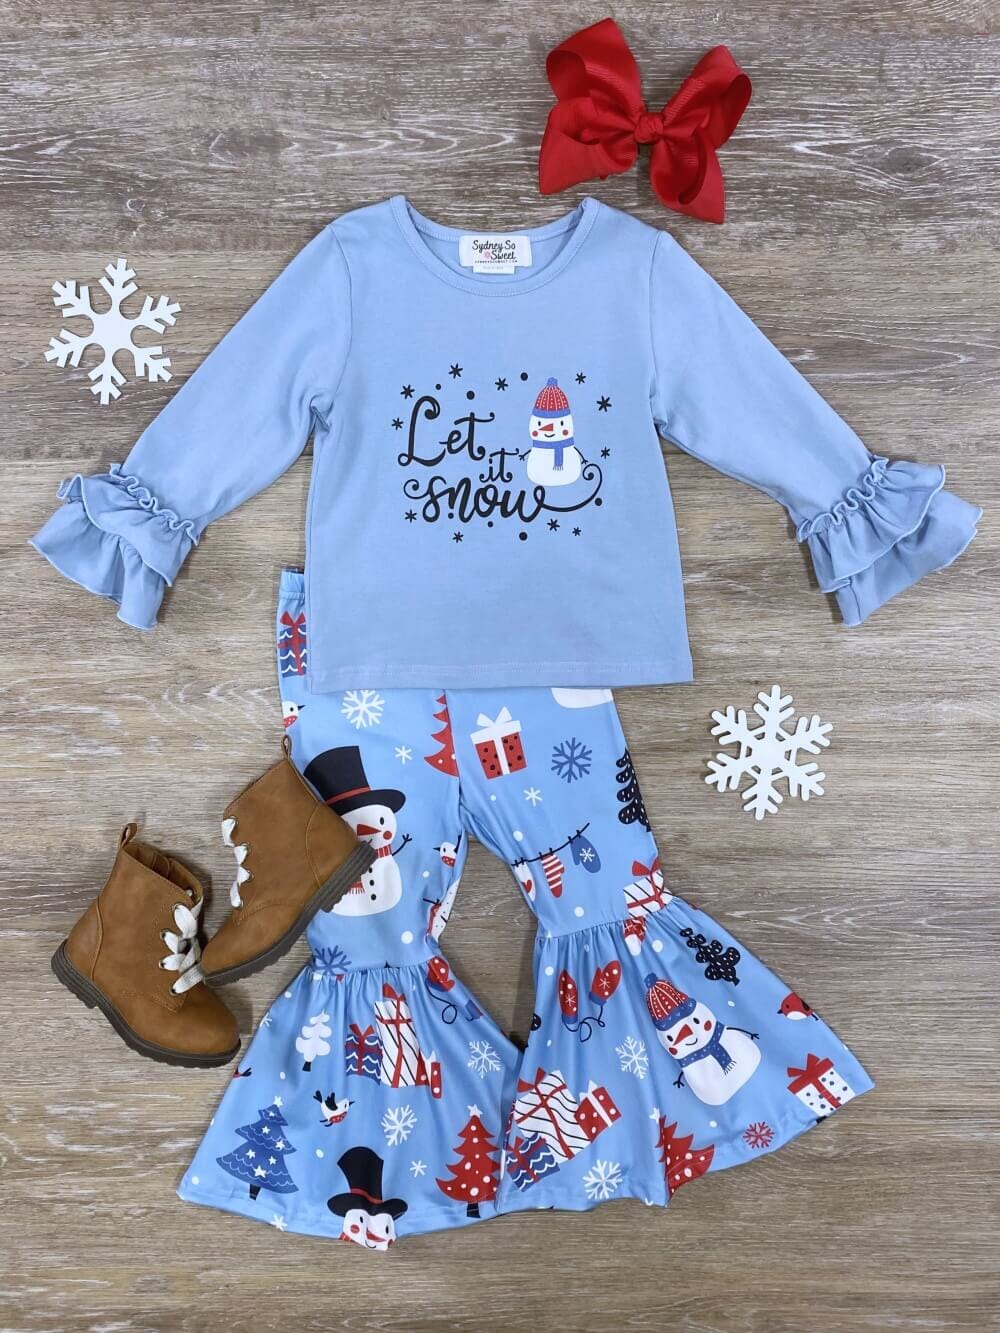 Let it Snow Blue Snowman Girls Bell Bottom Outfit - Sydney So Sweet